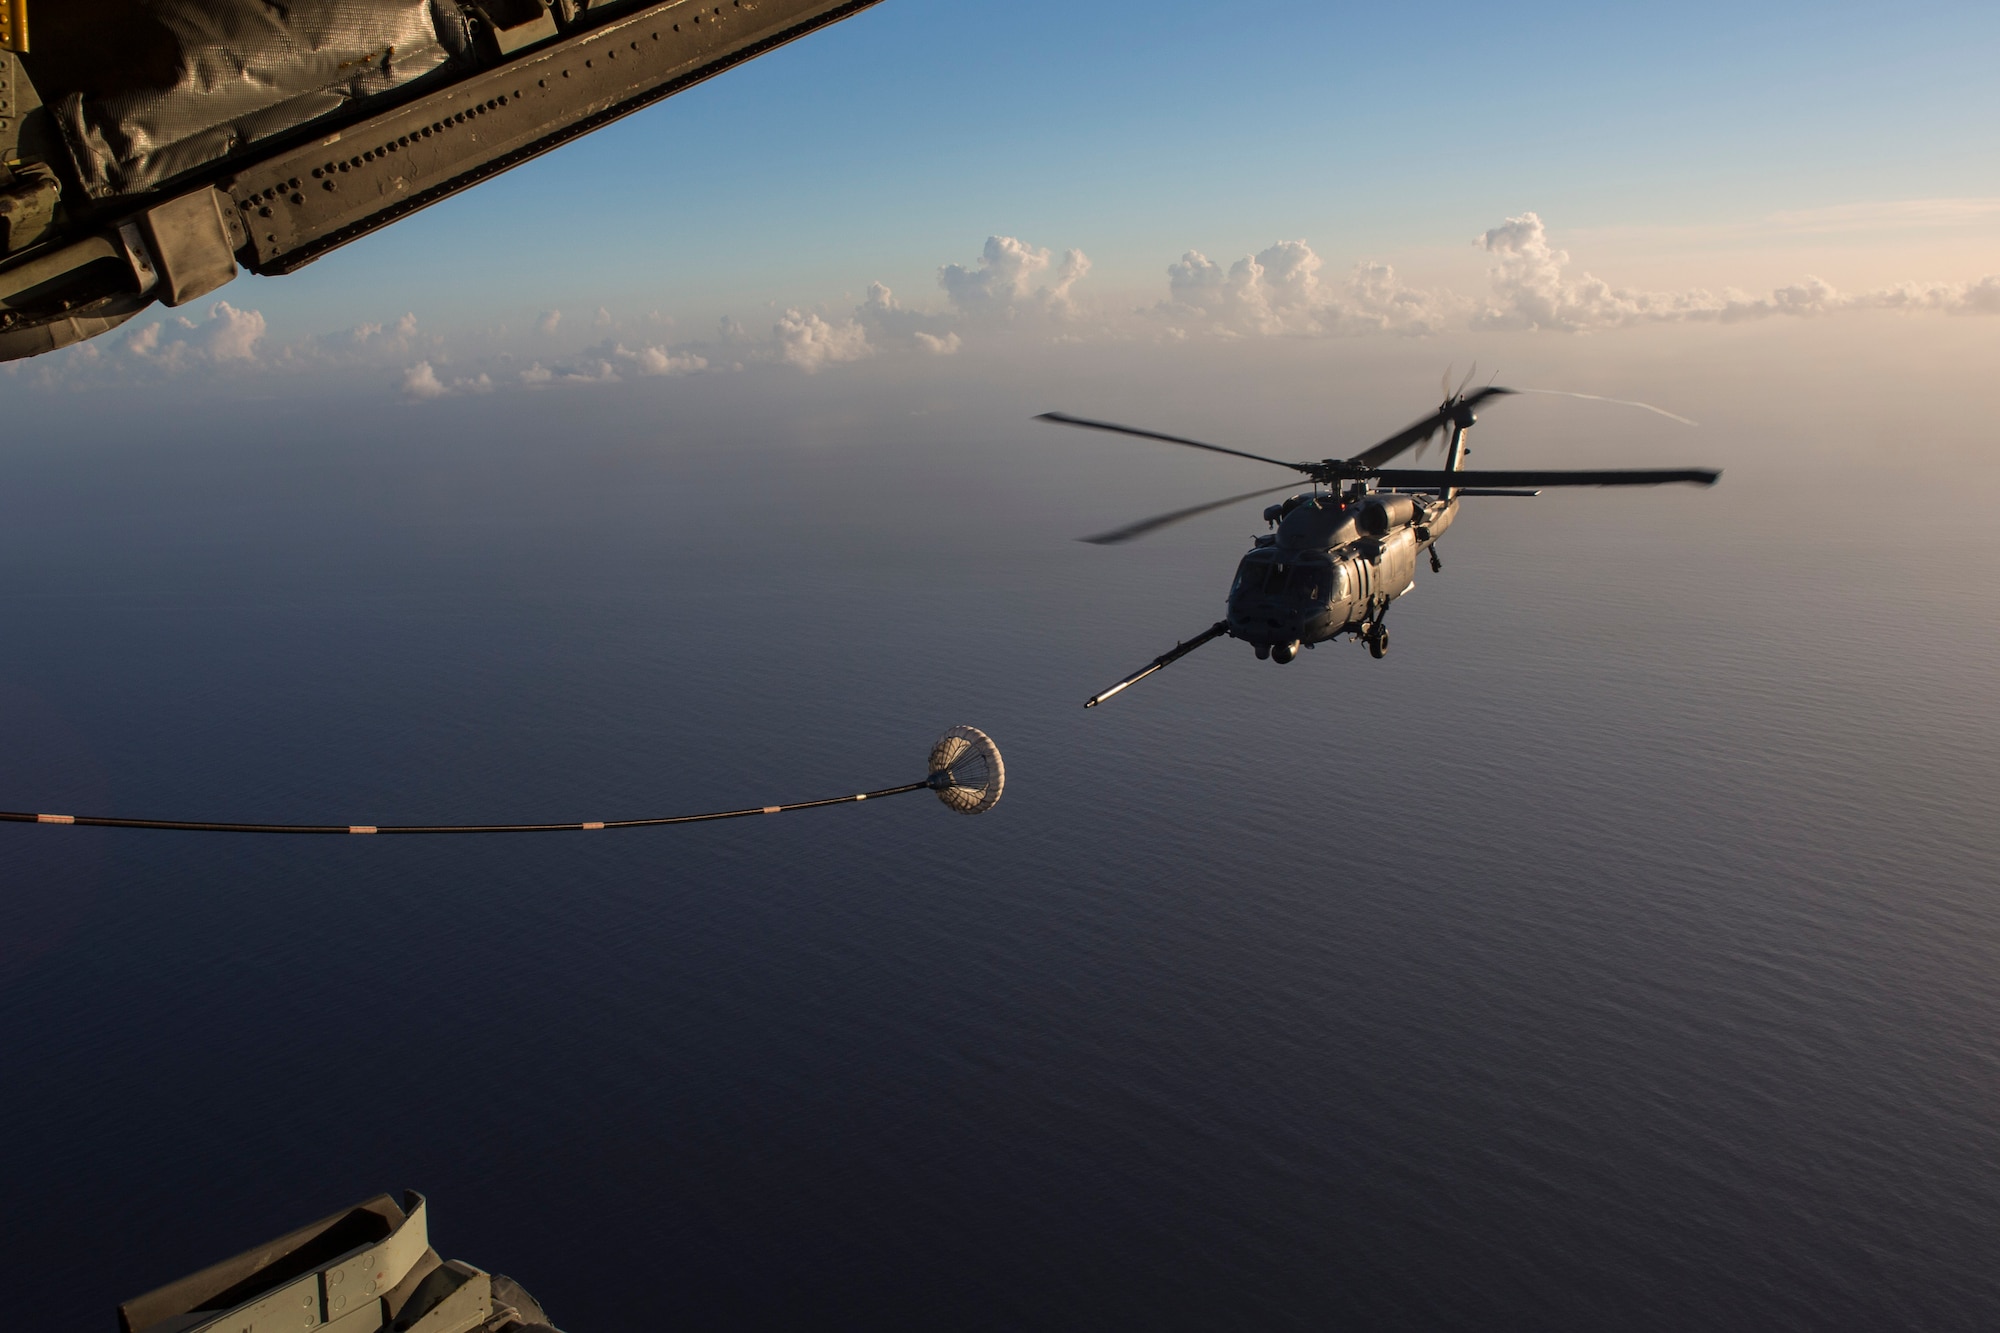 An HH-60G Pave Hawk refuels from an HC-130P/N King enroute to rescue two German citizens in distress at sea July 7, 2017 and into July 8. The victim's vessel caught fire approximately 500 nautical miles off the east coast of southern Florida. At the request of the U.S. Coast Guard's Seventh District in Miami, the 920th RQW was alerted by the Air Force Rescue Coordination Center at Tyndall Air Force Base, Florida, to assist in the long-range search and rescue. Approximately 80 wing Citizen Airmen and four wing aircraft helped execute the rescue mission to include, maintenance, operations and support personnel. (U.S. Air Force photo by Master Sgt. Mark Borosch)
